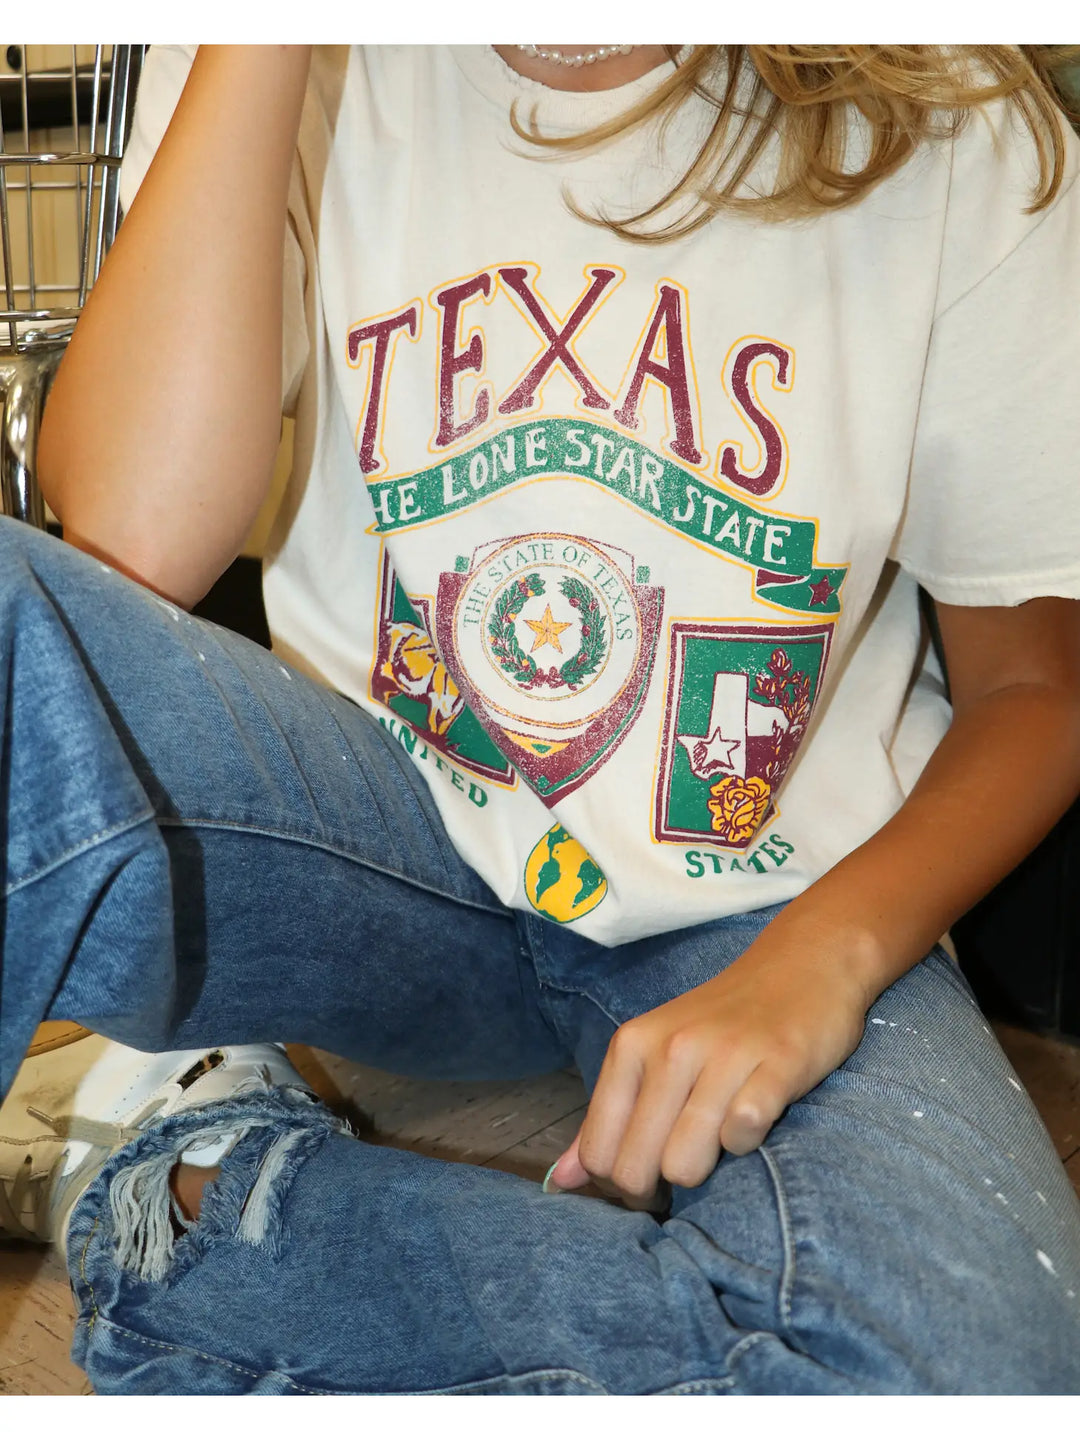 The Texas Patch Thrifted Tee